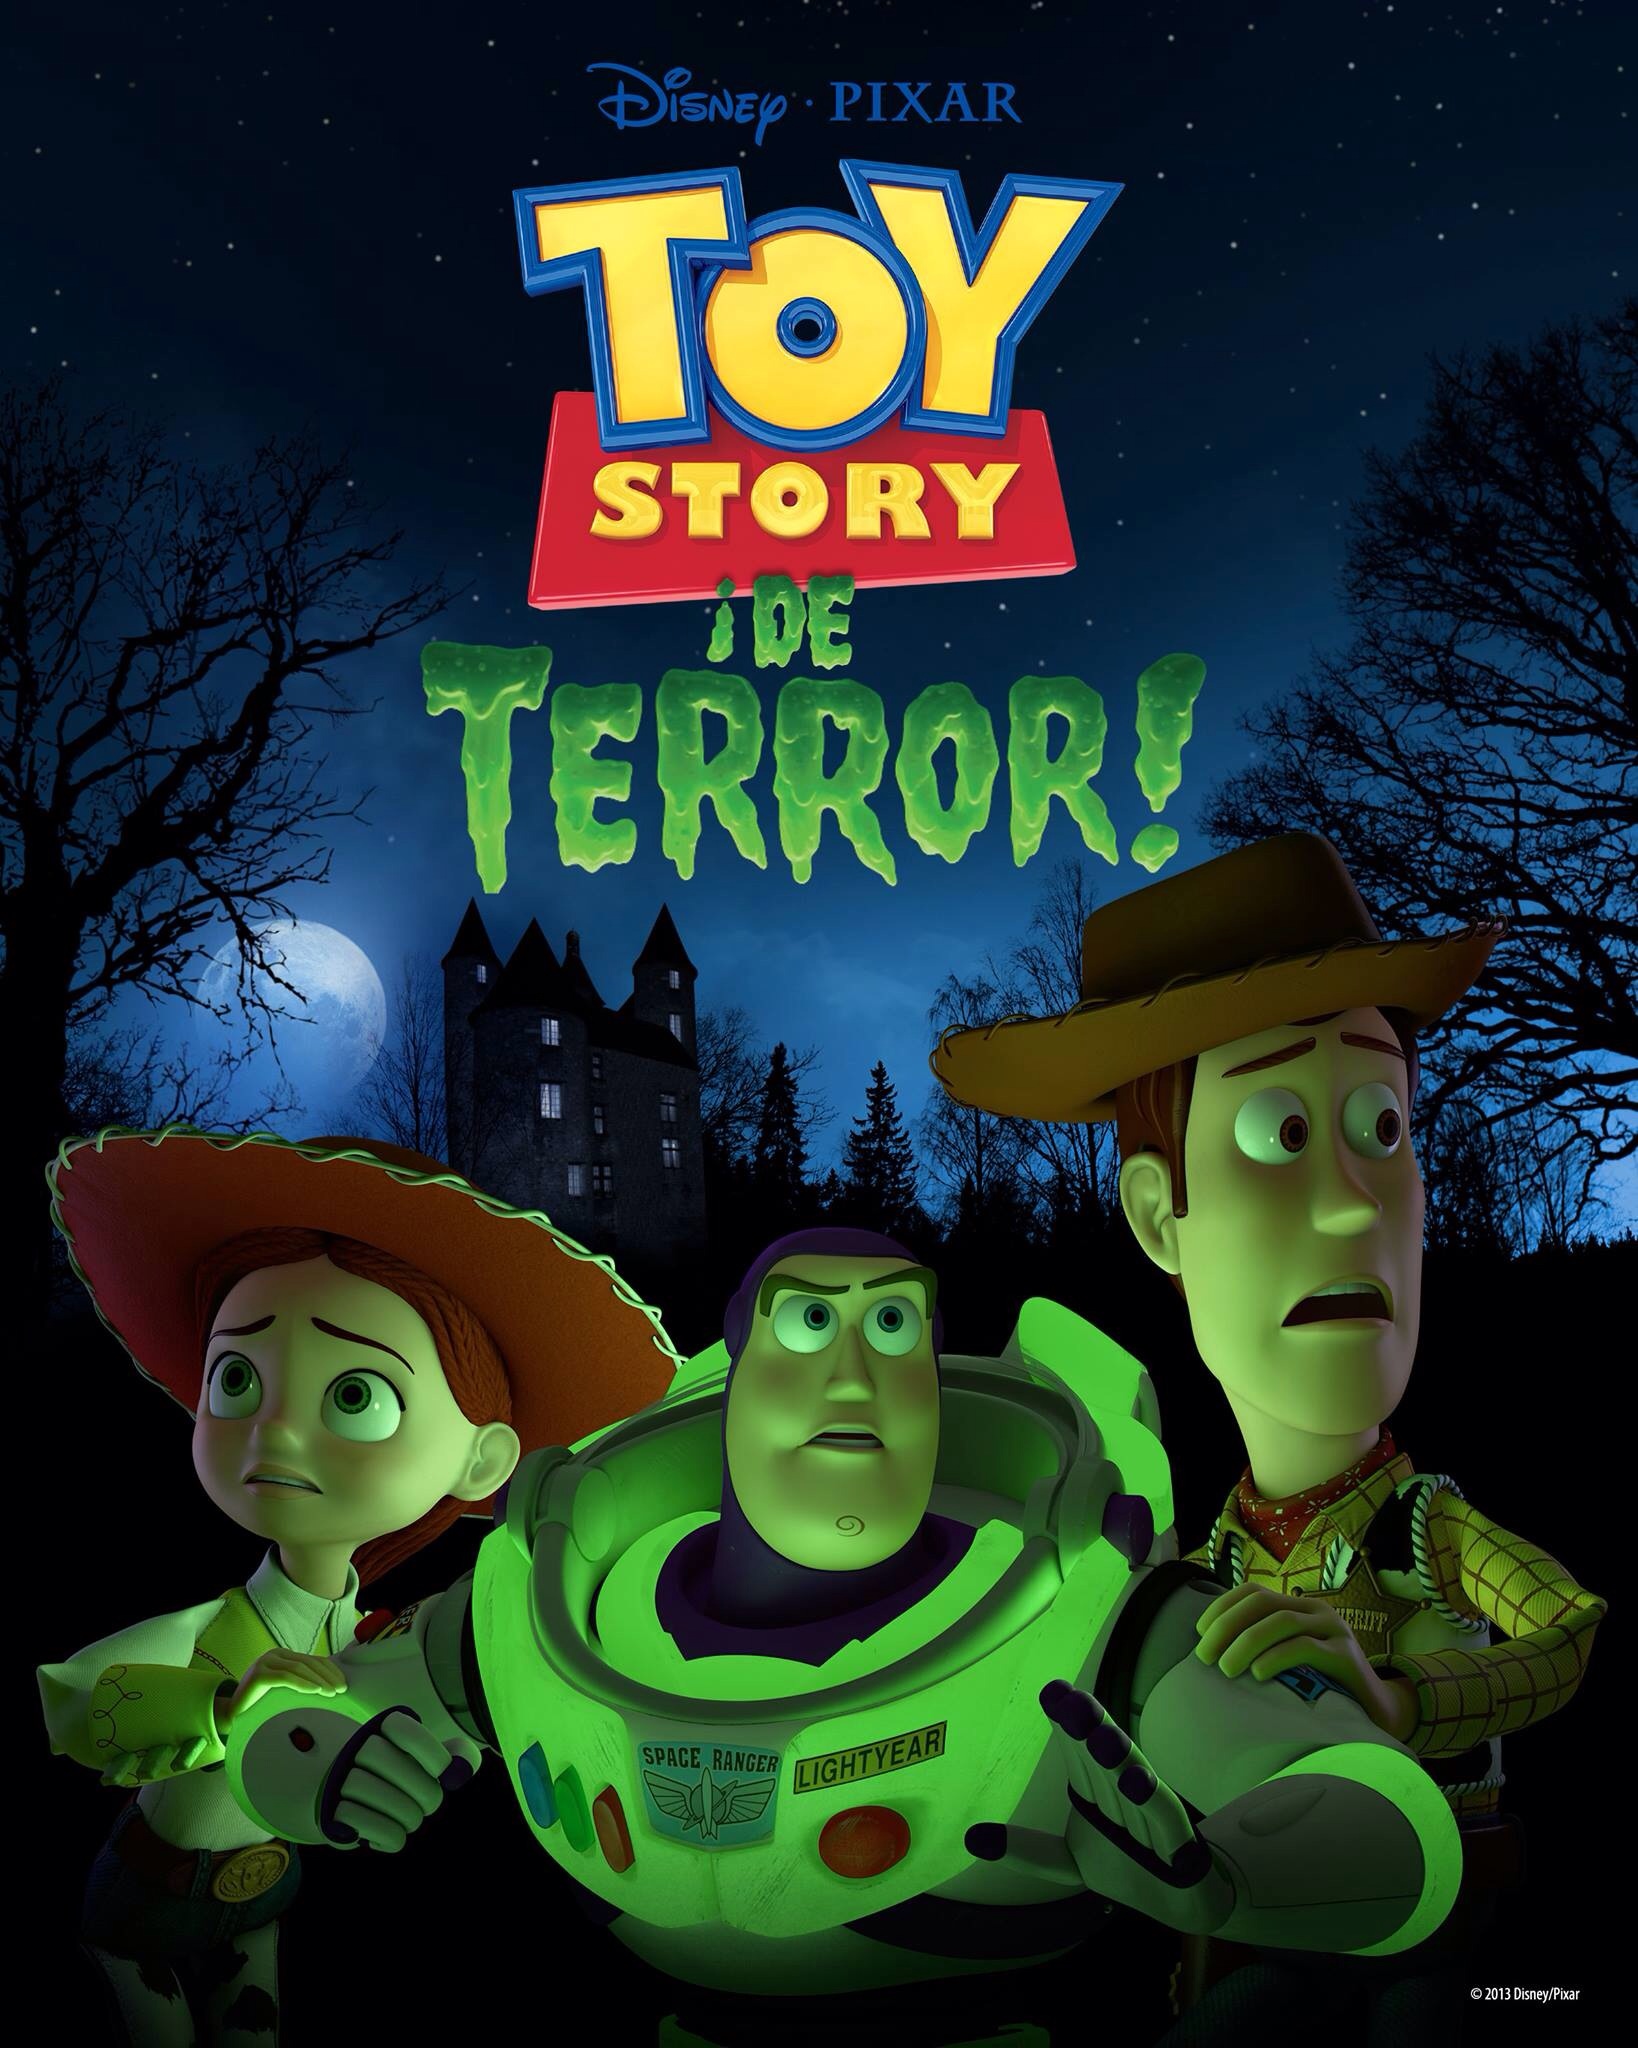 Toy Story Of Terror! Backgrounds, Compatible - PC, Mobile, Gadgets| 1638x2048 px